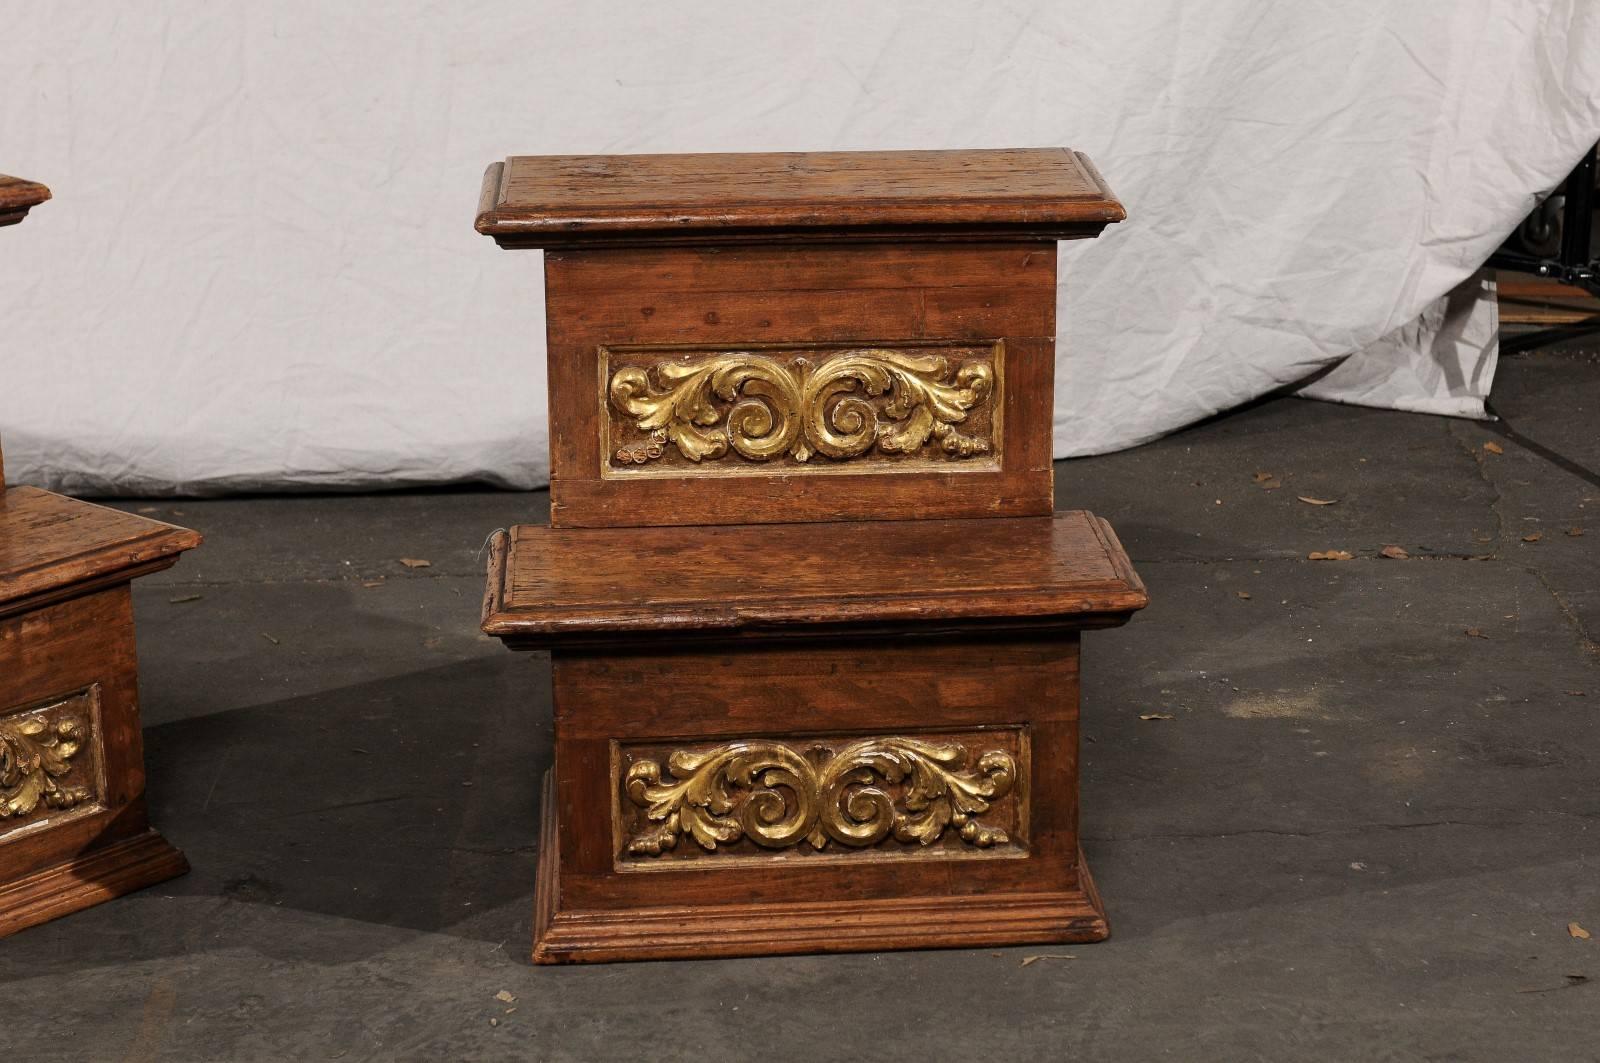 18th Century Pair of 18th-19th Century Italian Step Tables with Gilt and Old Elements